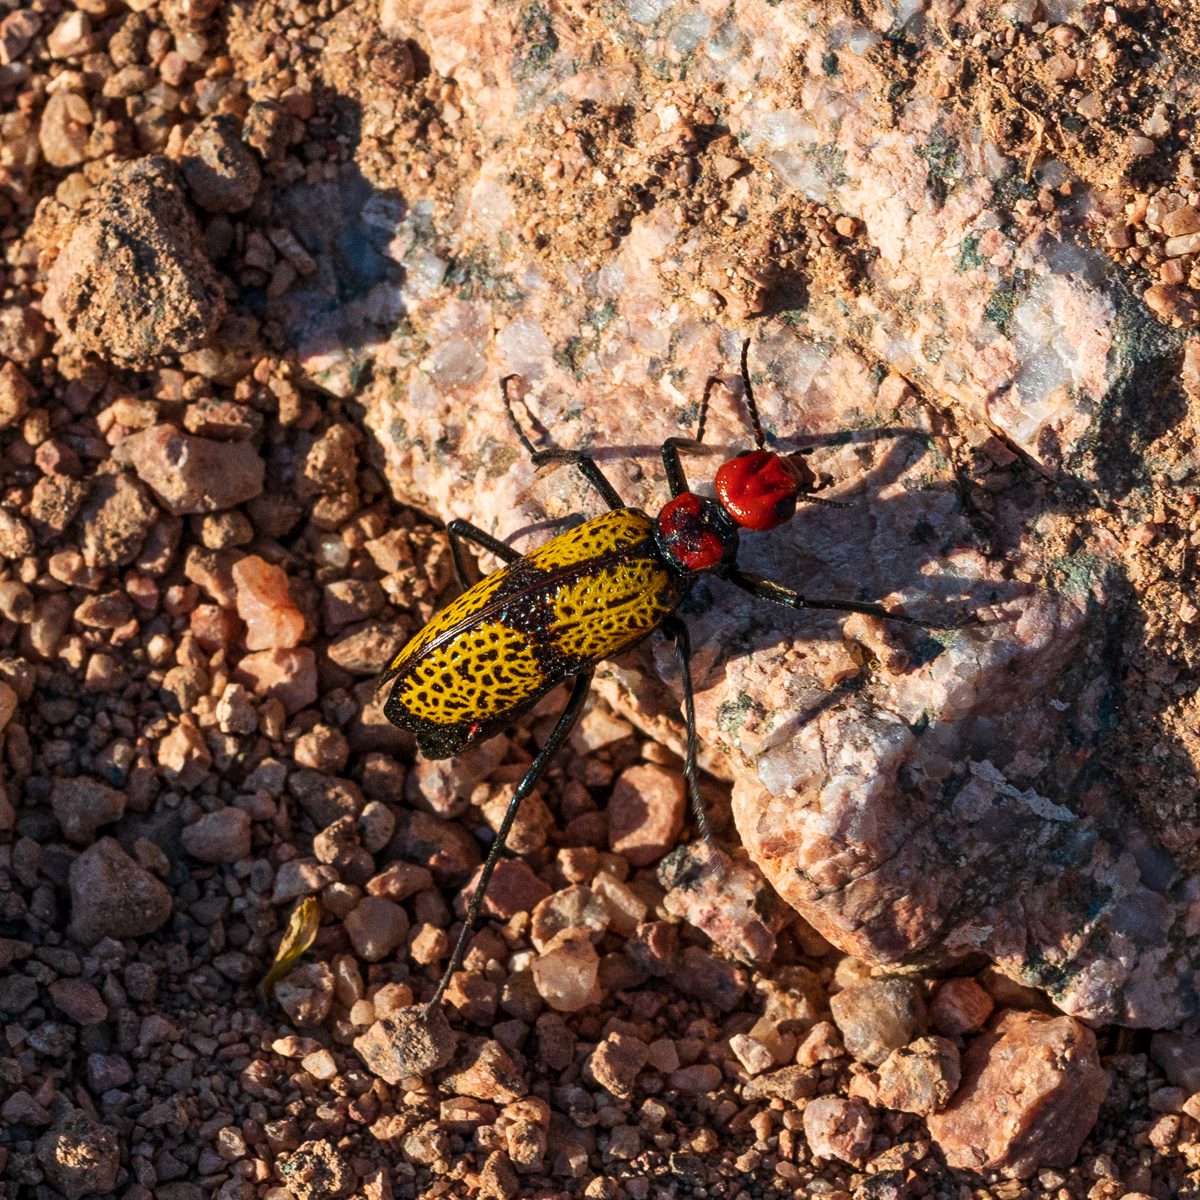 2020 May Iron Cross Blister Beetle in the Ironwood Forest National Monument